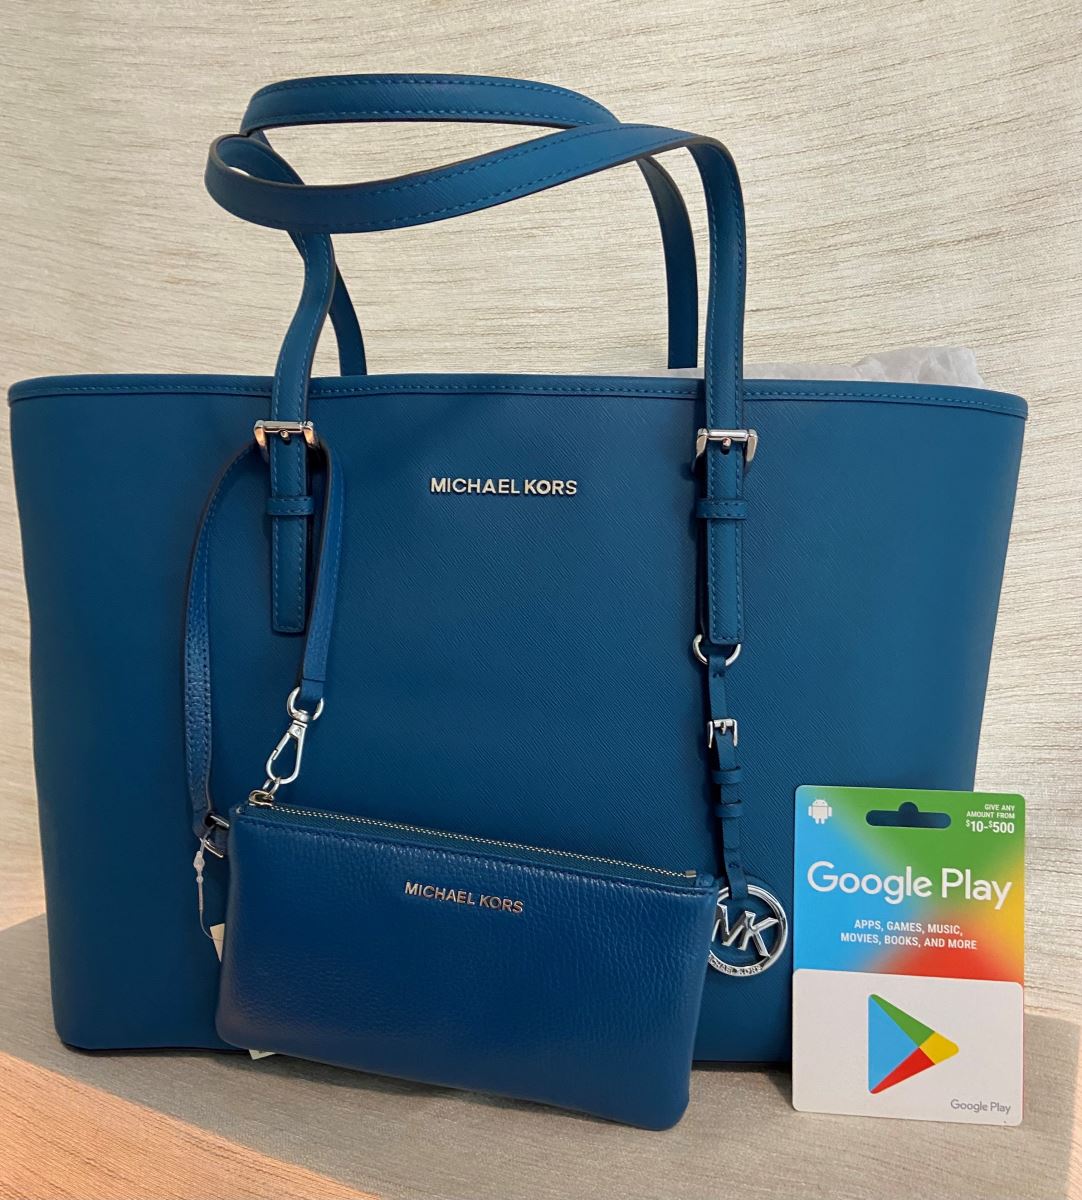 blue michael kors purse, wallet, and google play gift card